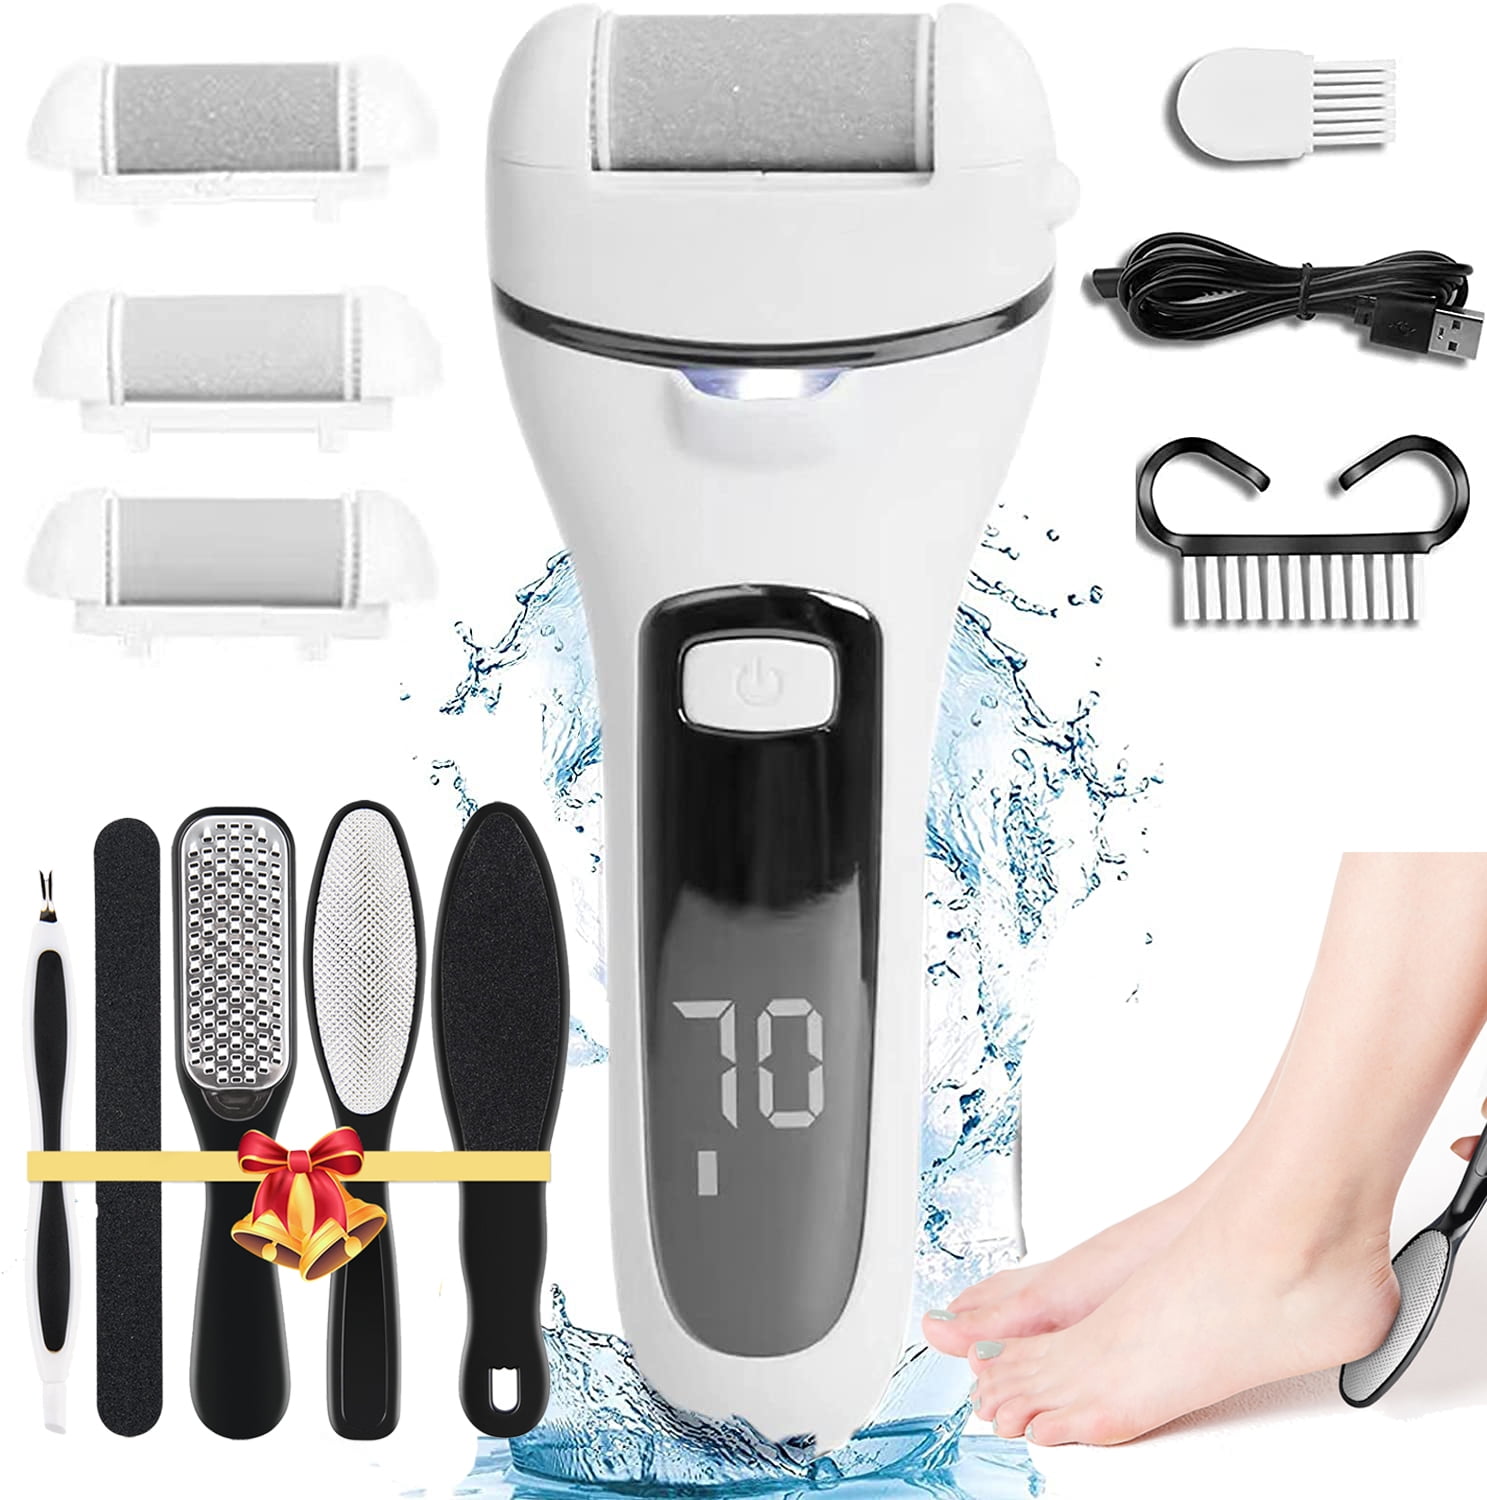 Electric Callus Remover for Feet,12 in 1 Pedicure Tools Kit Foot Scrubber  to Remove Dead Skin and Cracked Heels,Professional Foot Care Foot Files  with 3 Roller Heads, 2 Speed, Battery Display,White 